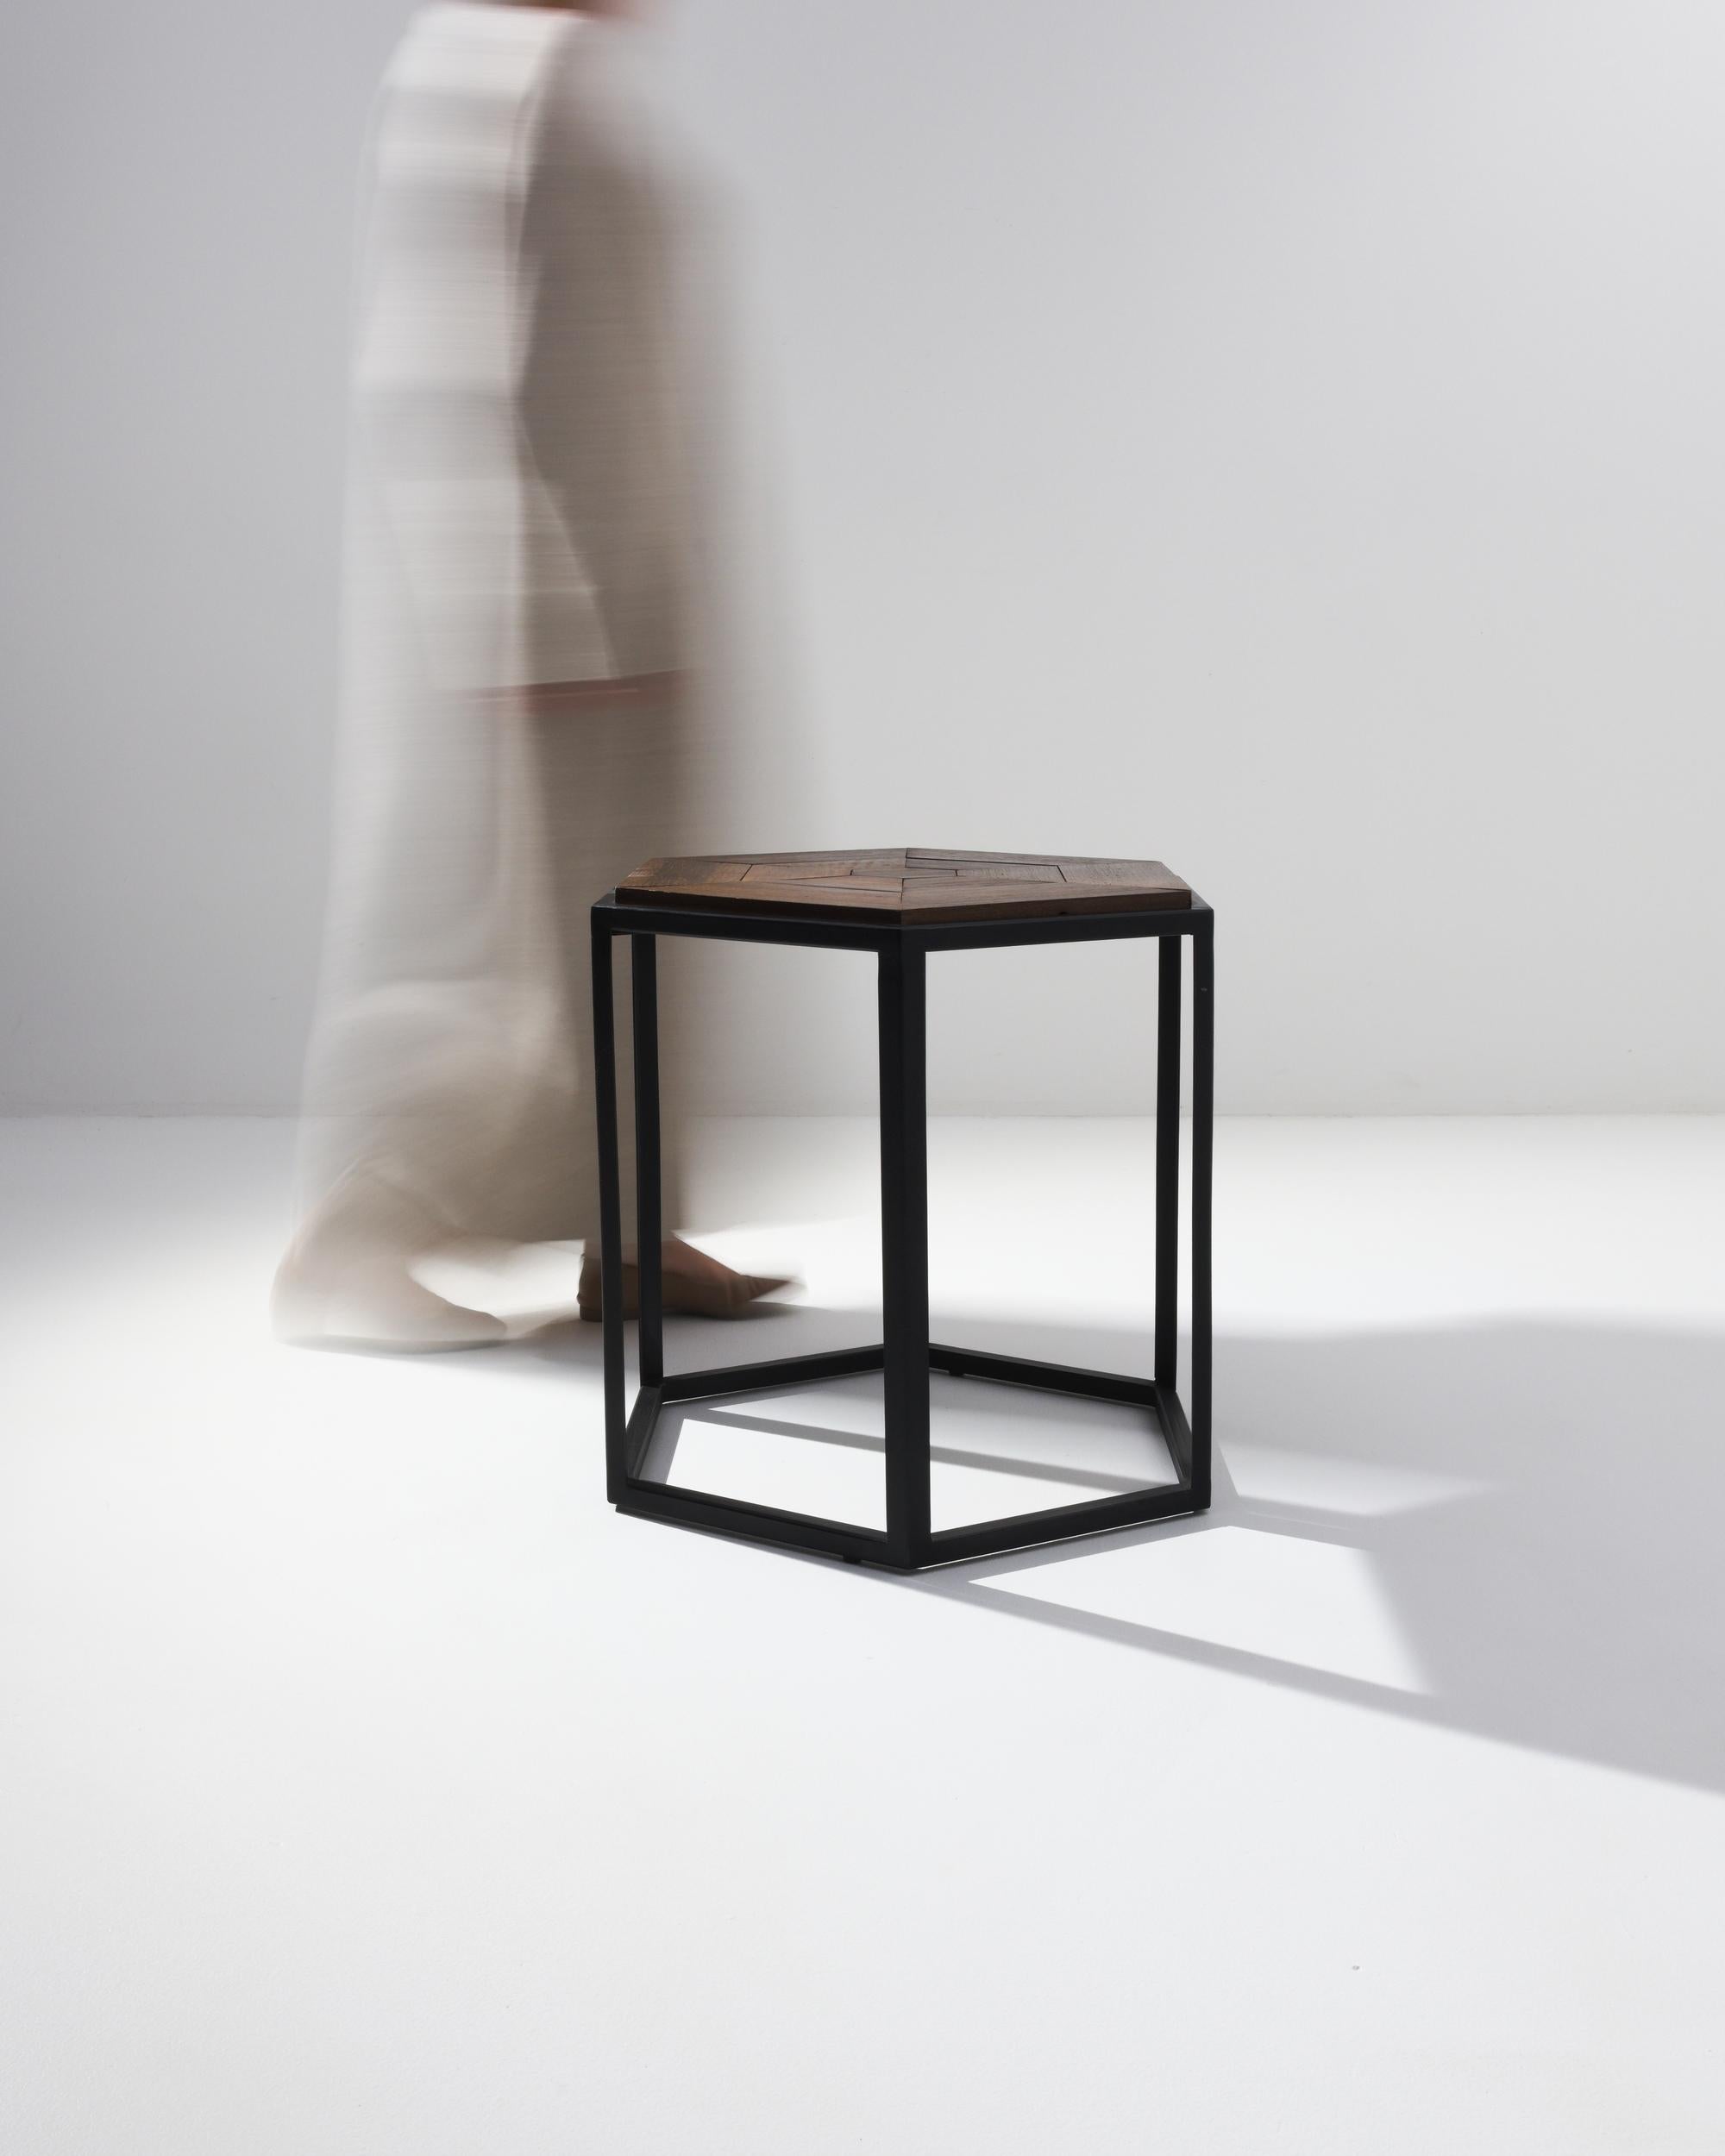 Produced in our atelier as a one of a kind prototype combining a minimal steel mount with a parquet style azobé wood top. This coffee table boasts a visually striking metal base crafted in the shape of a cylindrical polygon, which harmoniously pairs